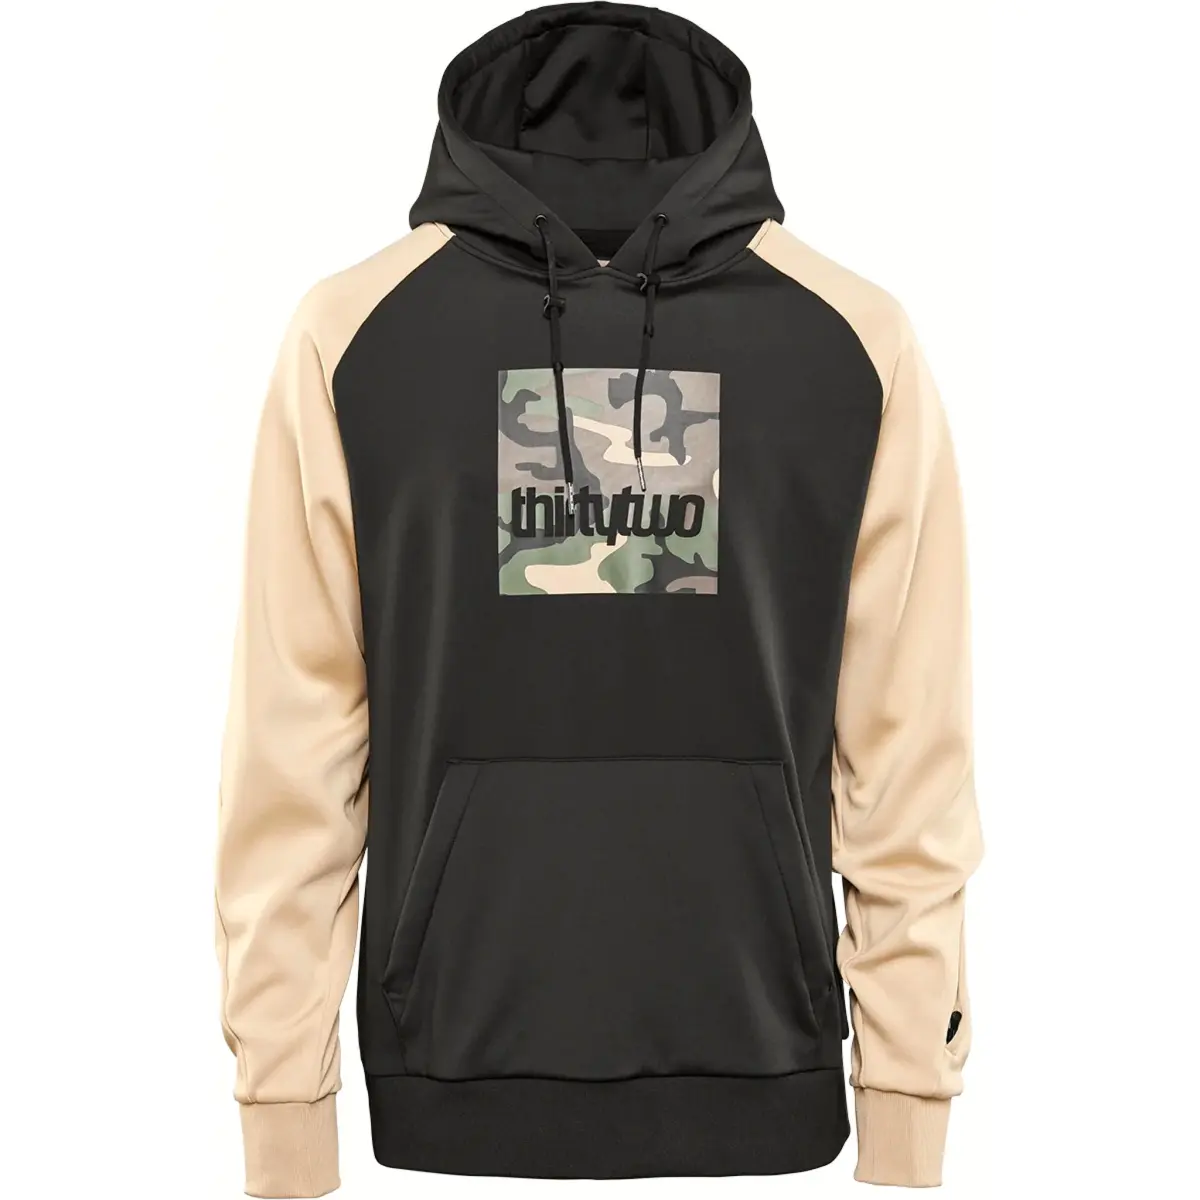 Thirty two franchise tech pullover hoodie